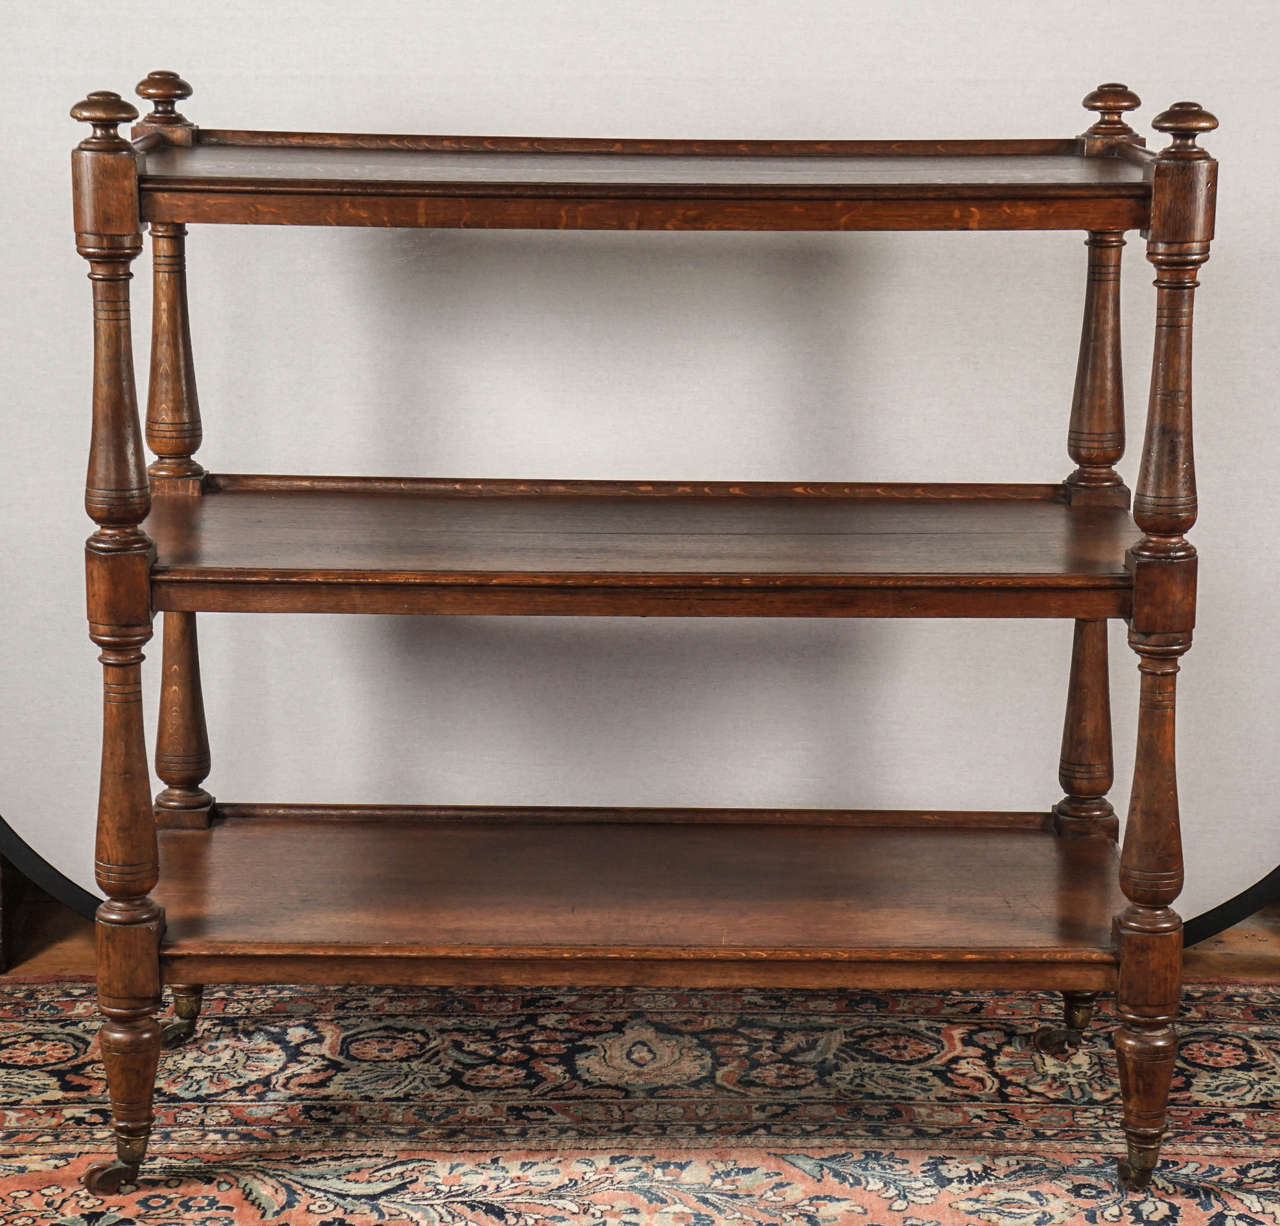 Nice English 19th century oak etagere/trolley. Three shelves united by turned supports on casters.